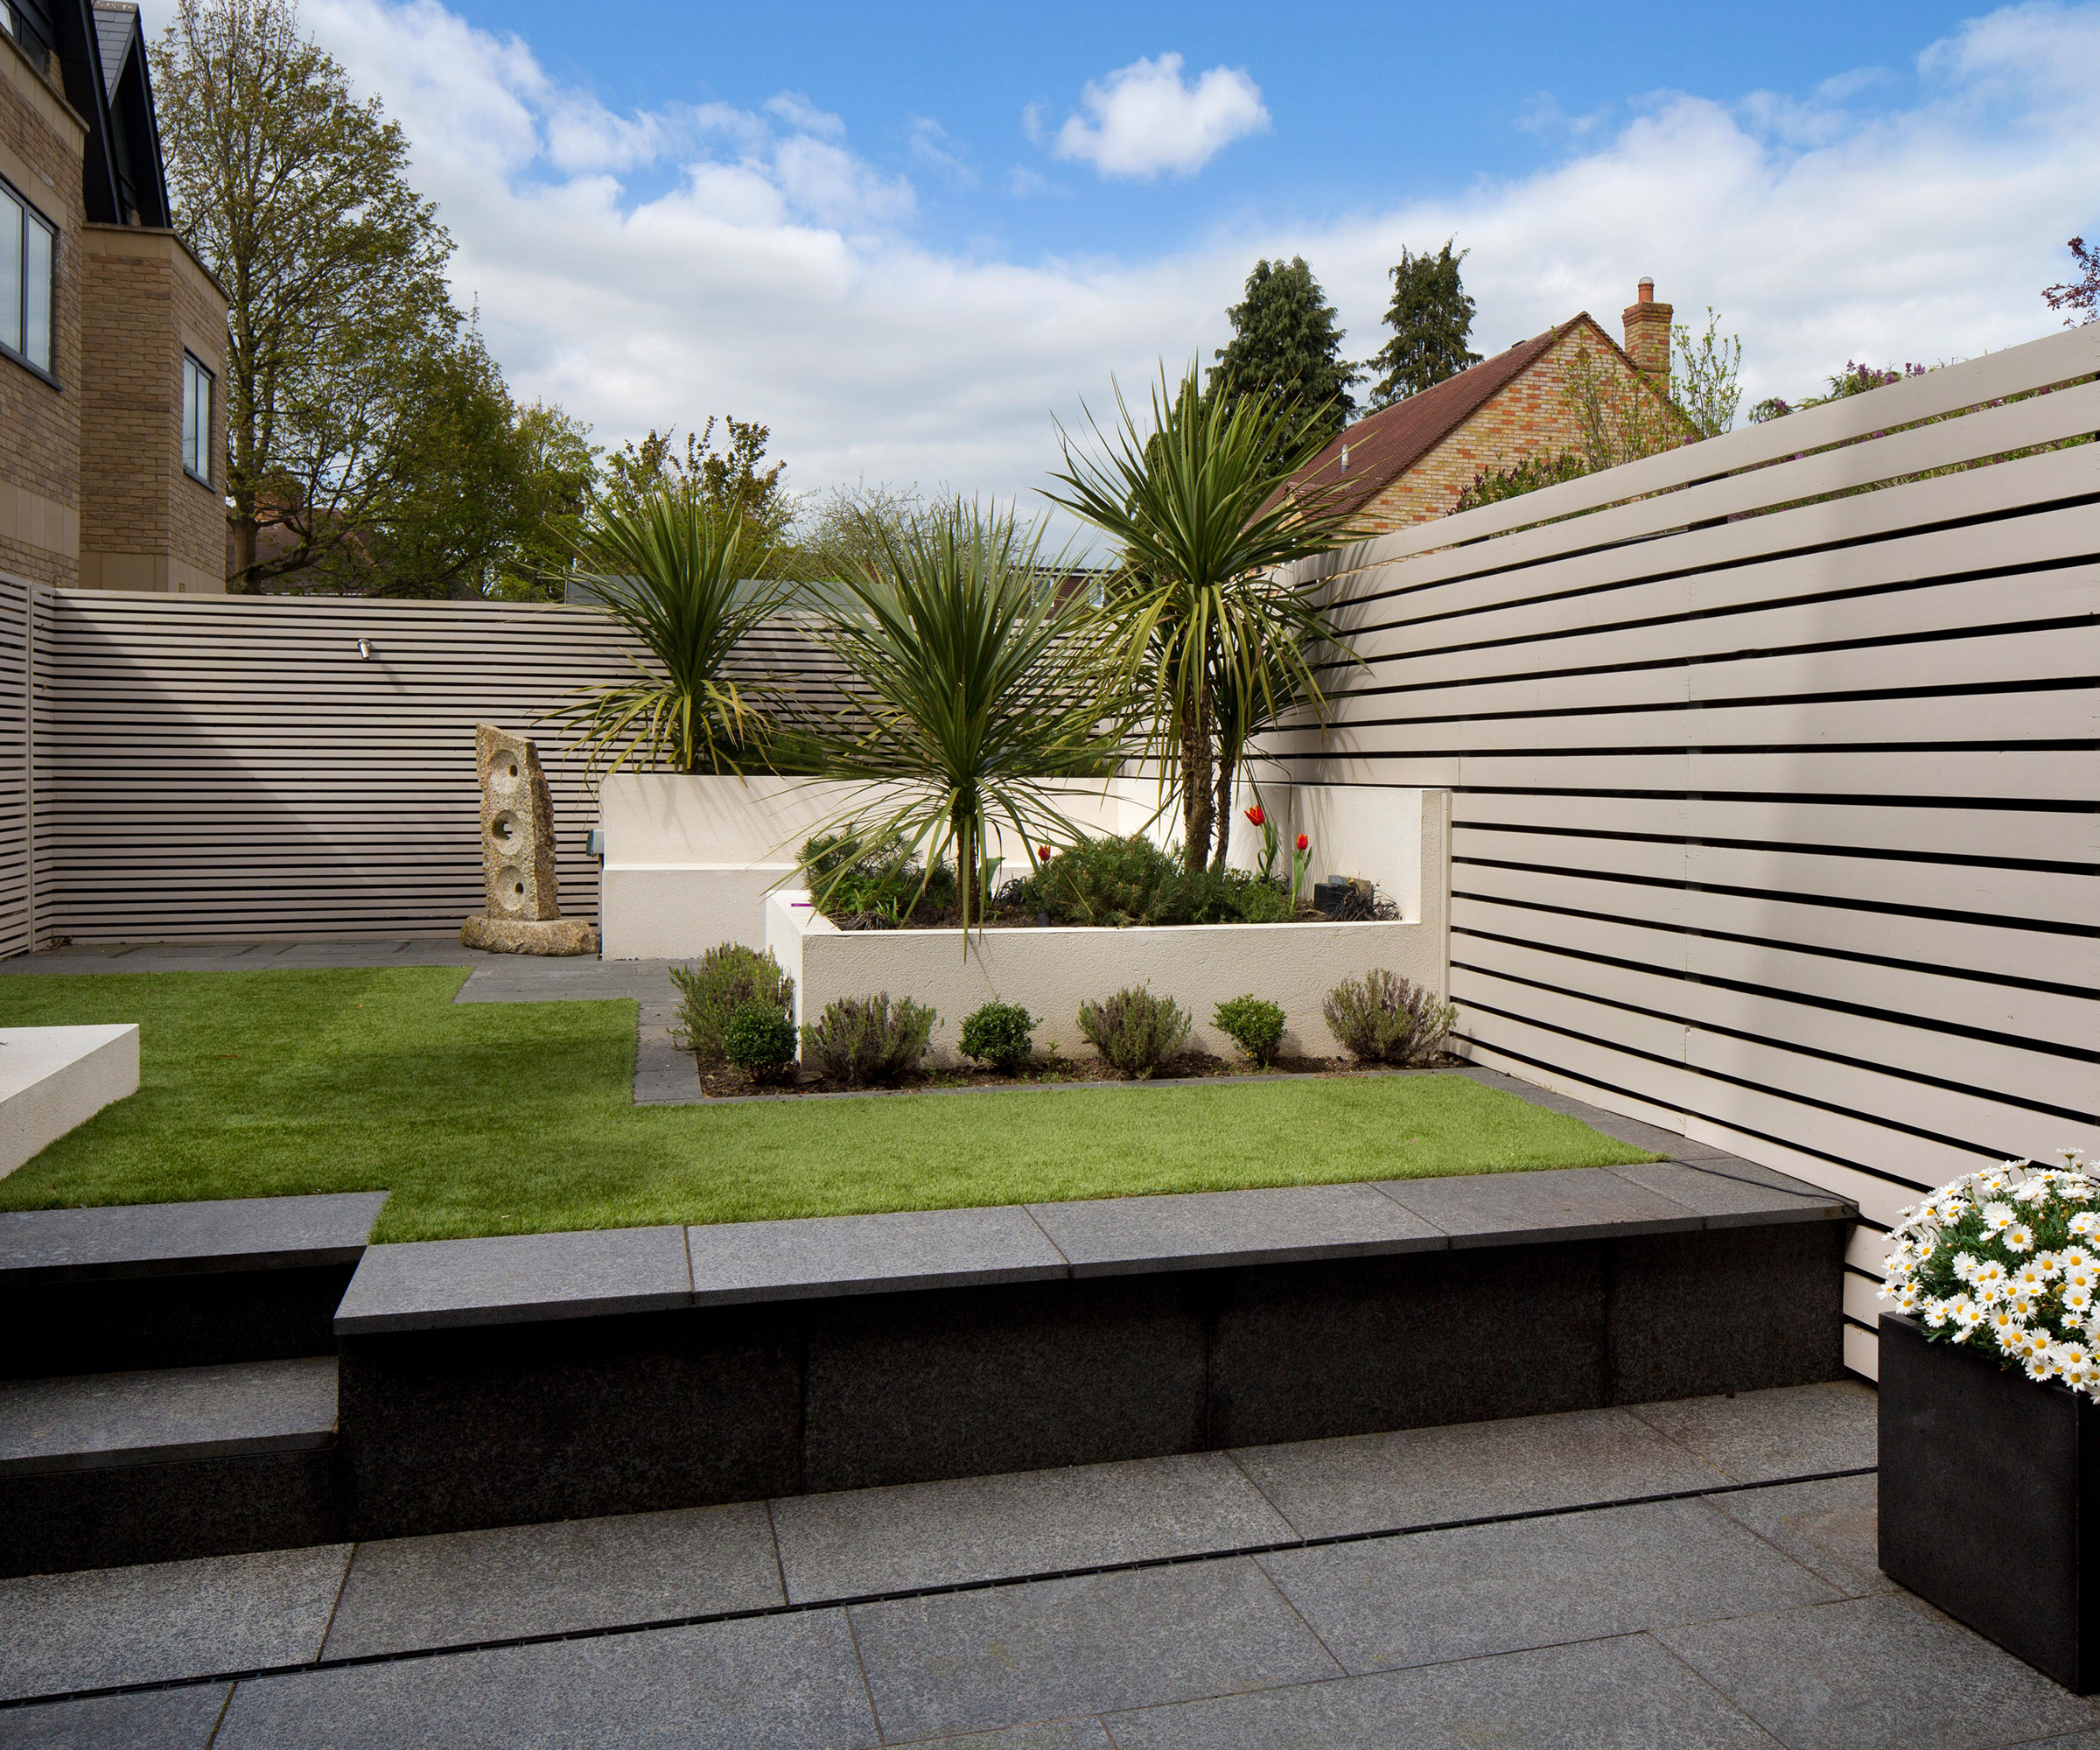 Modern Contemporary English garden with Wooden slated painted screen fence, fake grass and granite paving